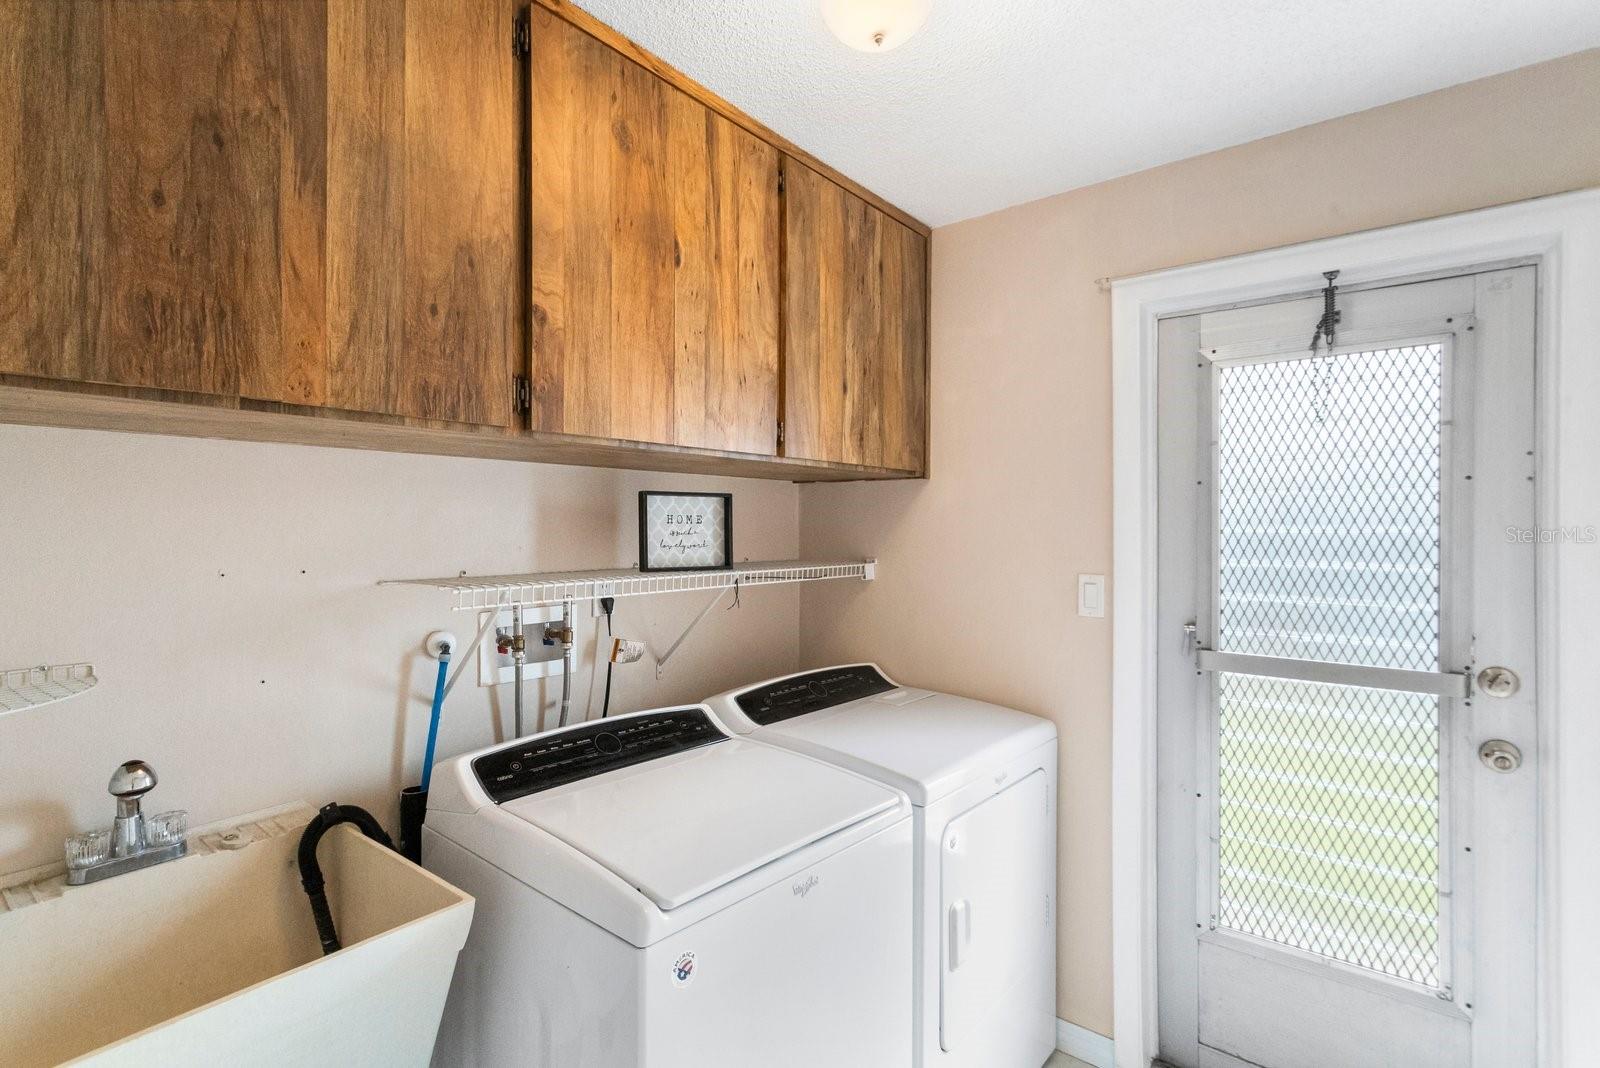 inside laundry room with wash tub and cabinets and door to outside also!